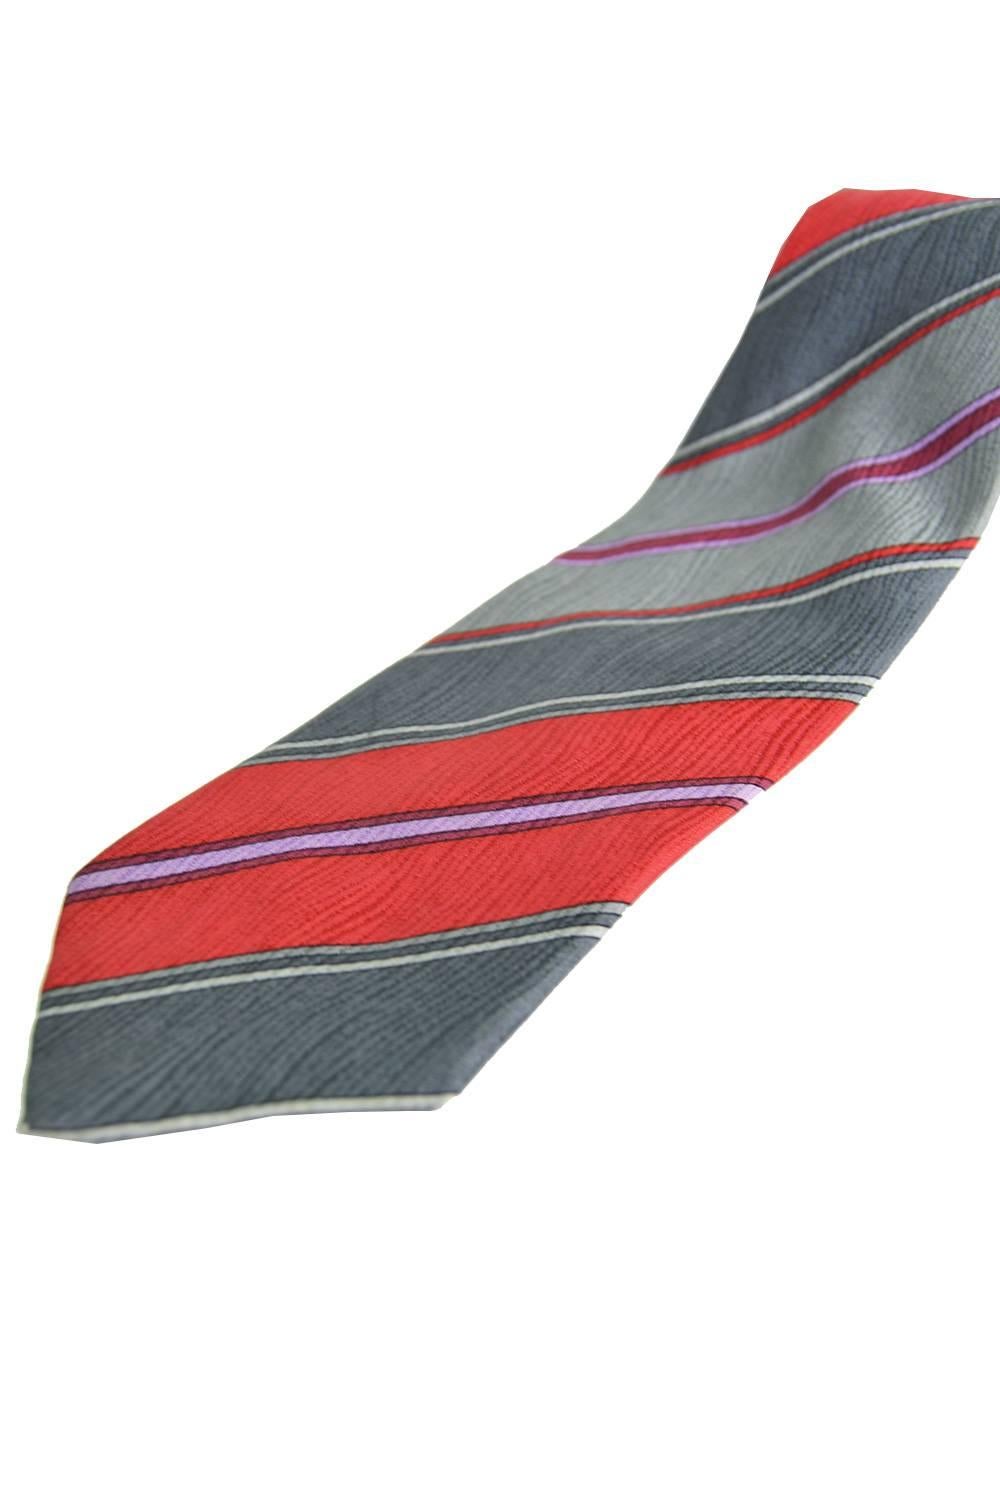 An elegant vintage mens necktie in a pure silk with a satin jacquard throughout by French luxury designer, Pierre Balmain. So timeless with the main colours being a classic red and grey with purple stripes throughout, it would make the perfect gift